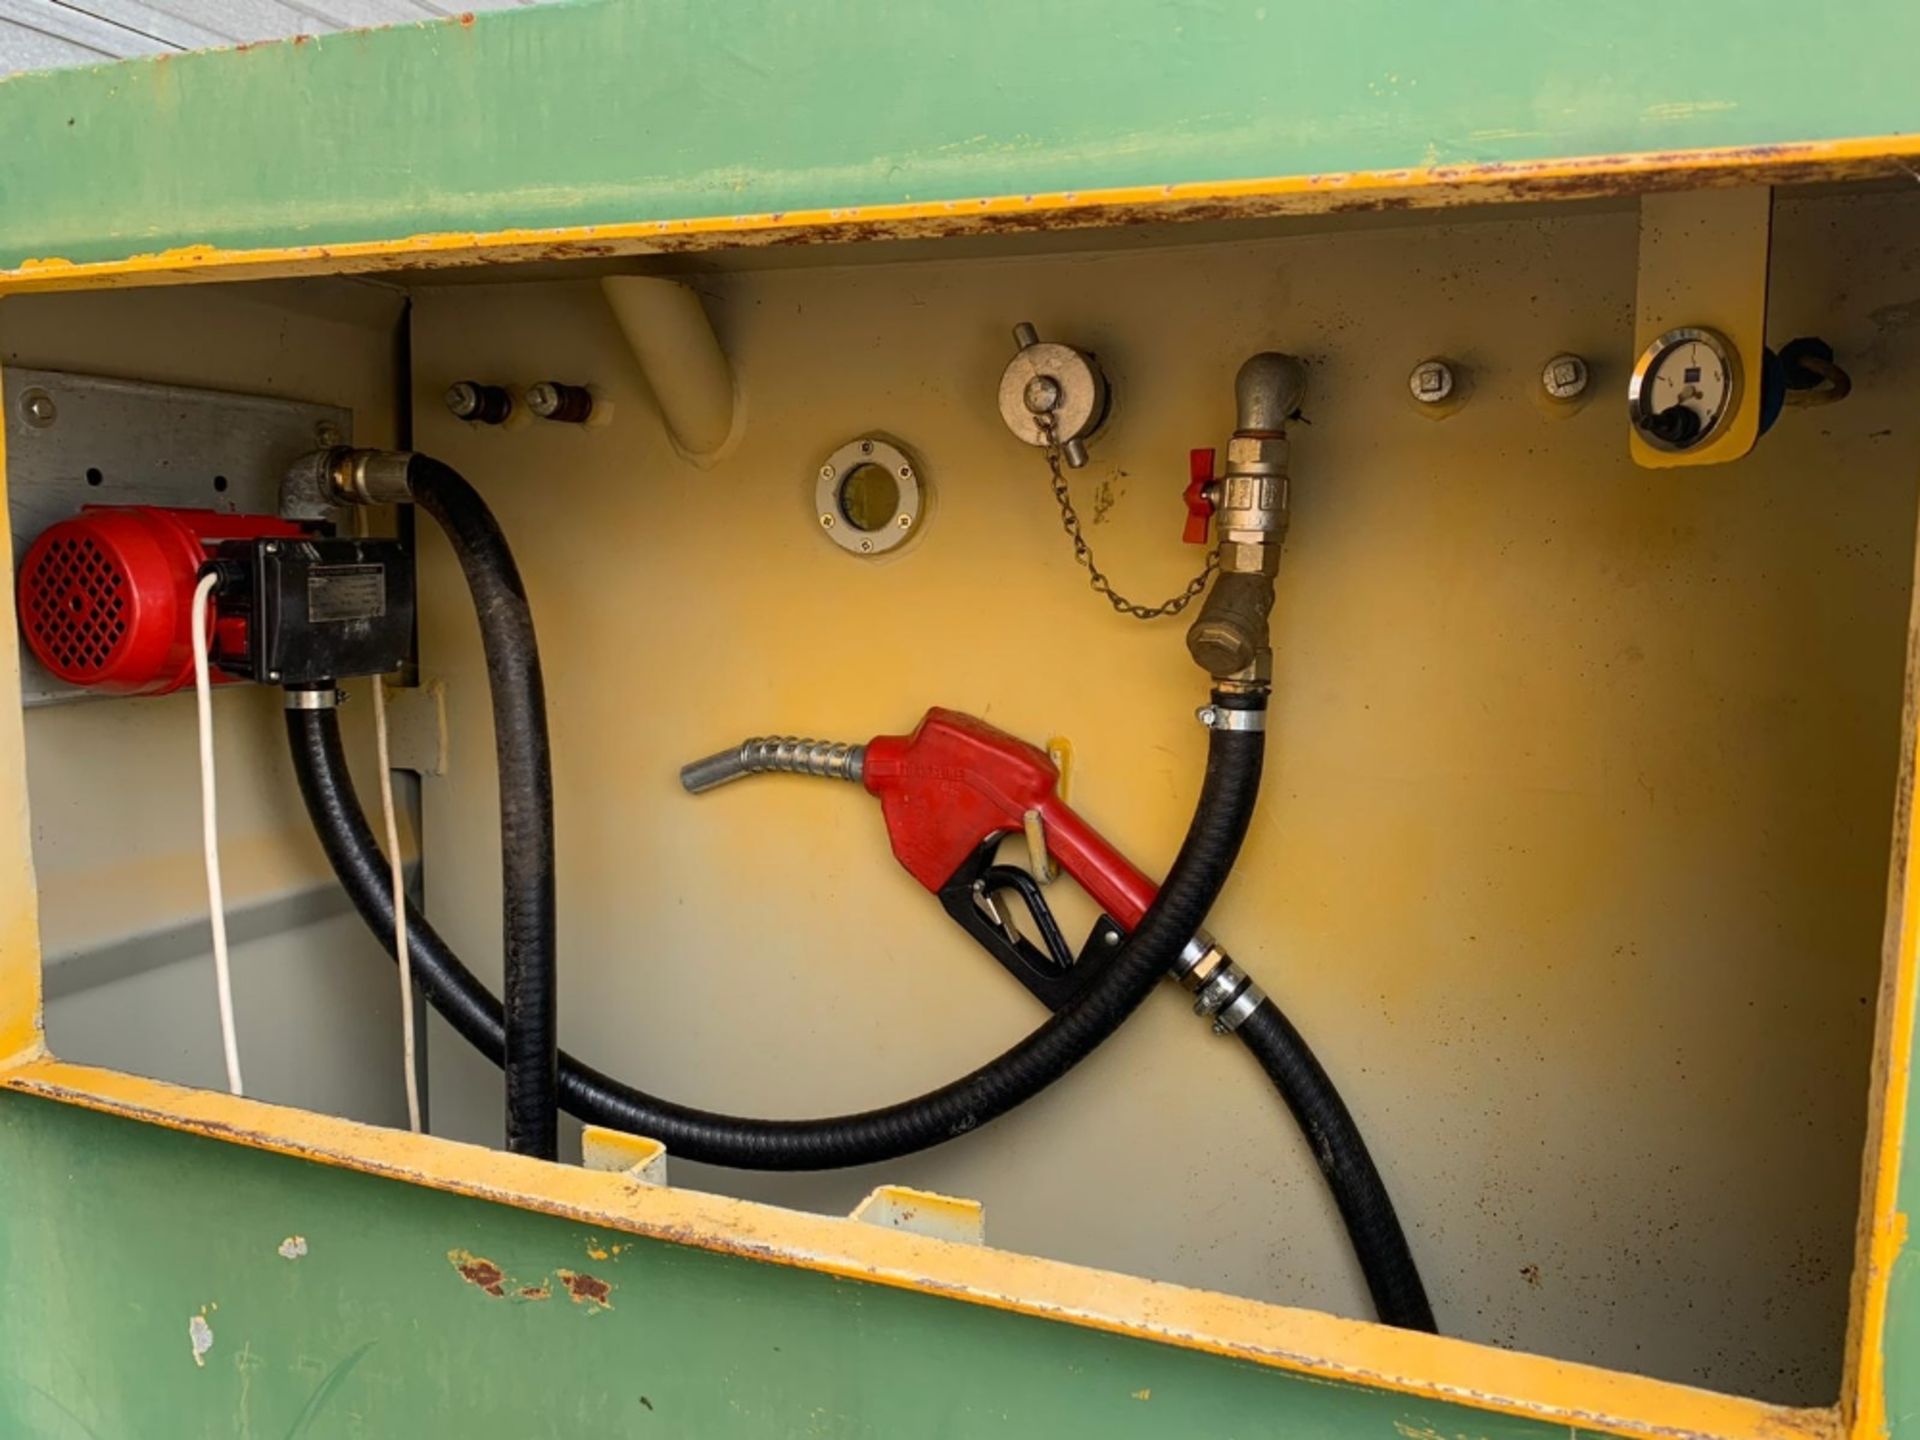 WESTERN 4550LITRE BUNDED FUEL TANK WITH 240VOLT REFUELLING PUMP, GUN AND HOSE. VIEWING WELCOMED, BY - Image 5 of 6